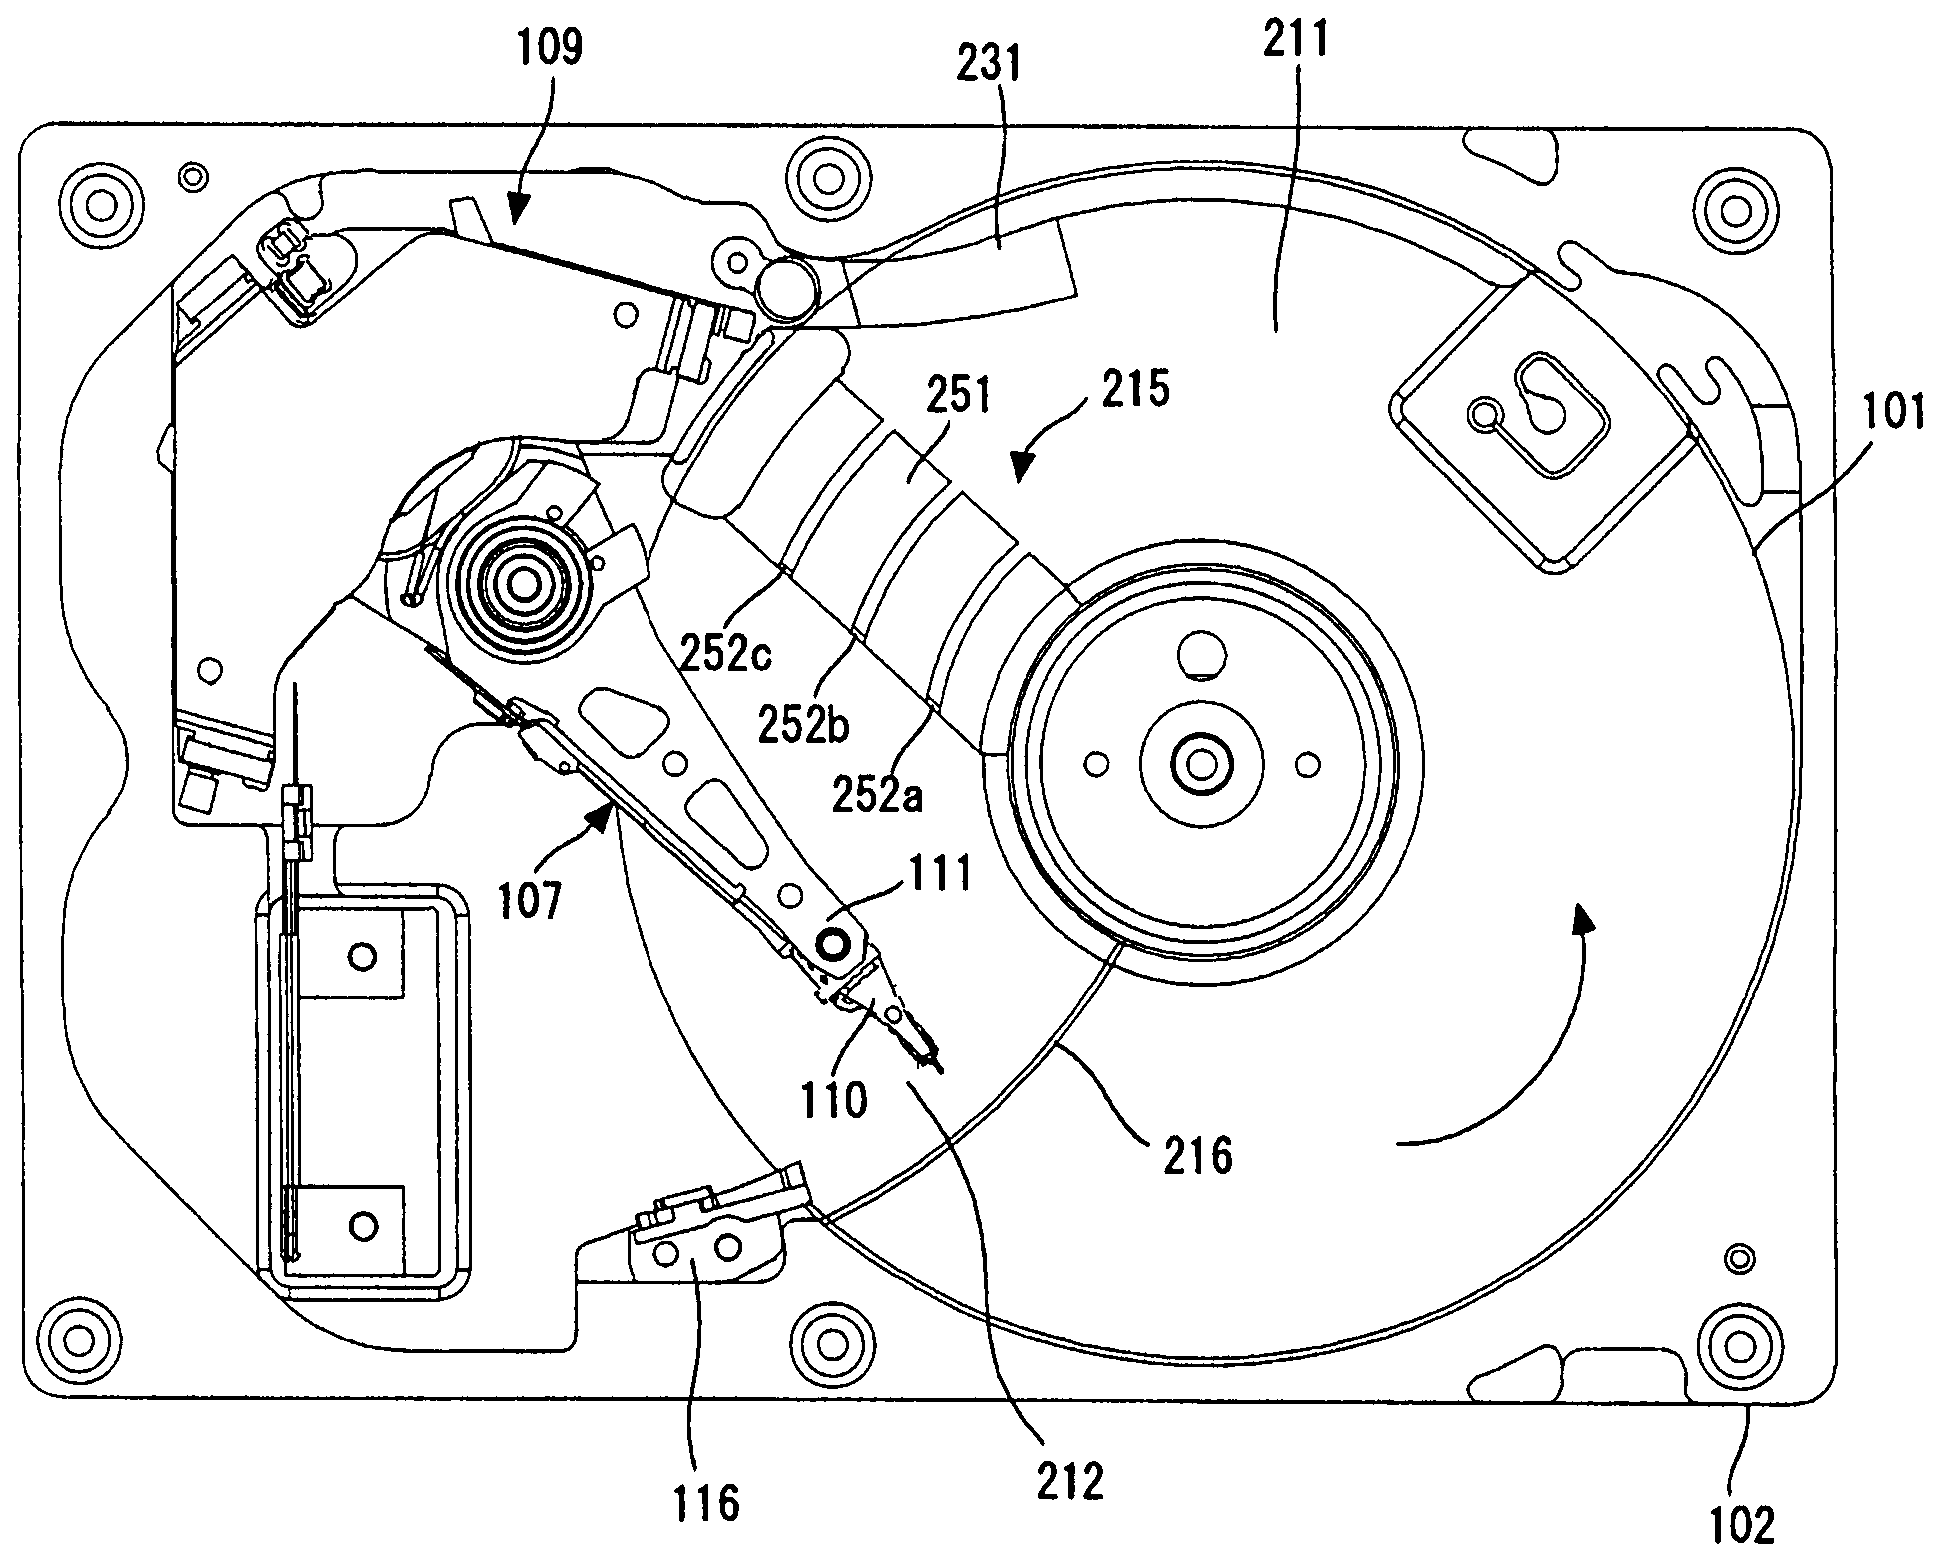 Disk drive with airflow control and fins at a transitional surface between base surfaces